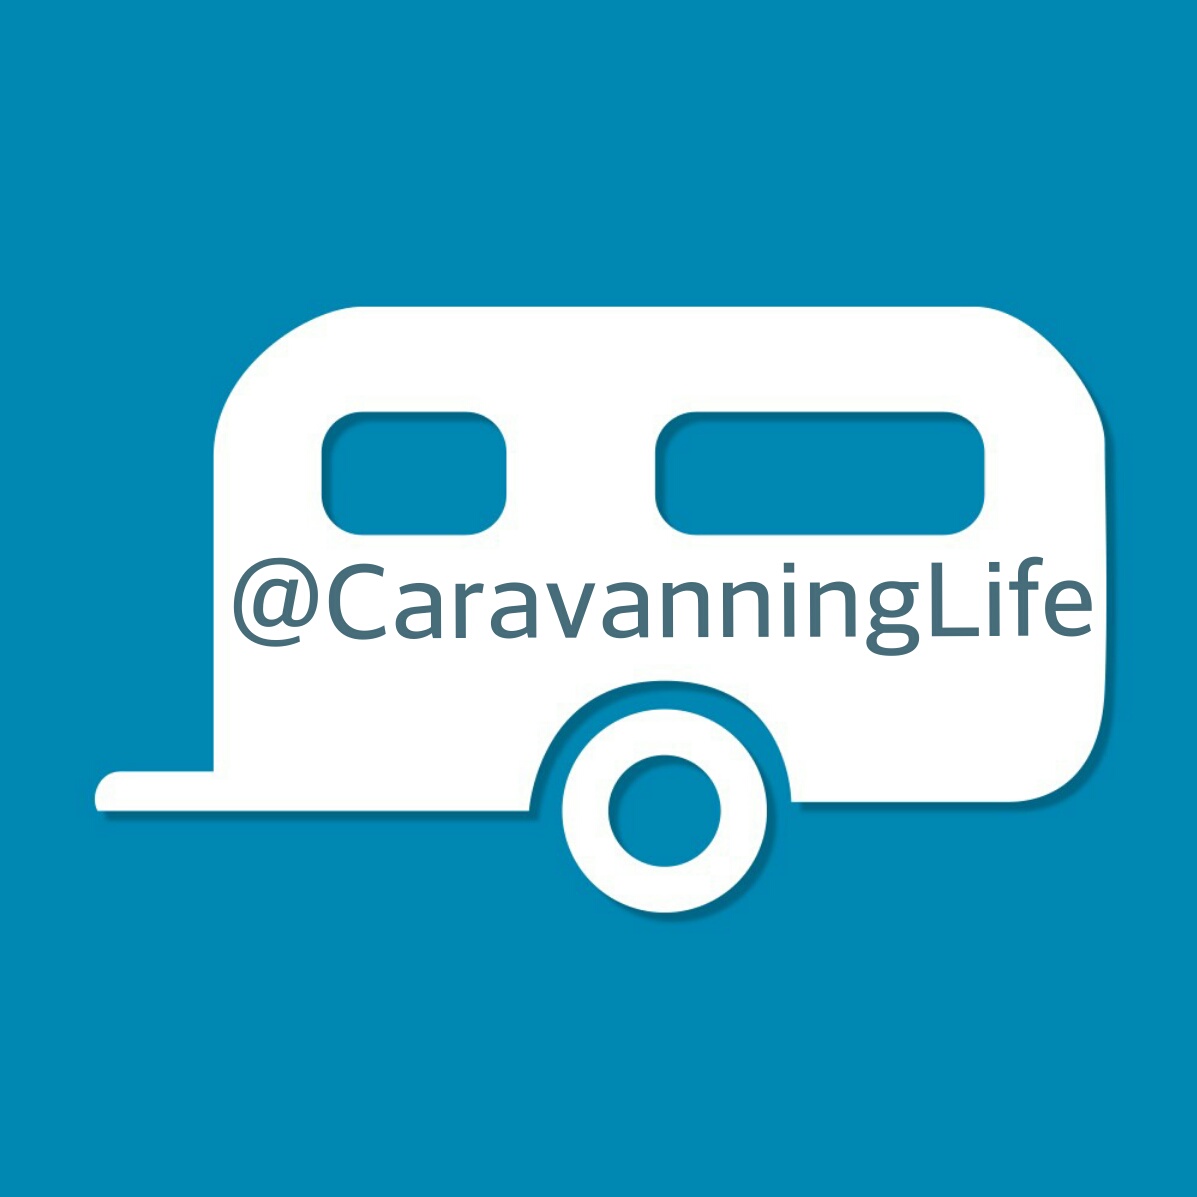 New logo for a new decade | Caravanning Life